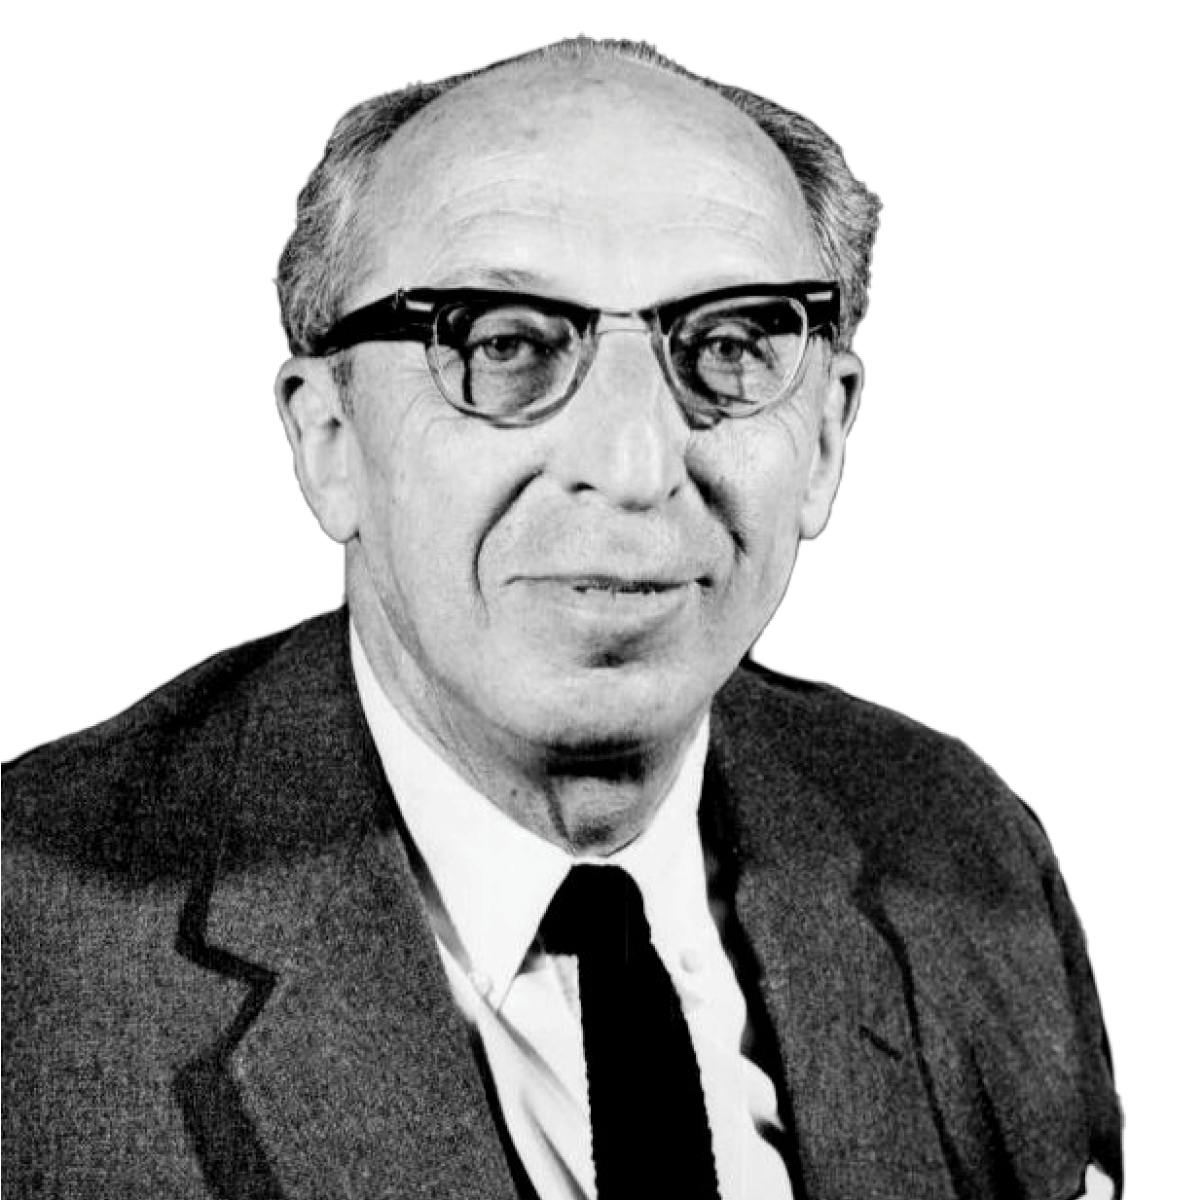 Black and white photograph of composer Aaron Copland